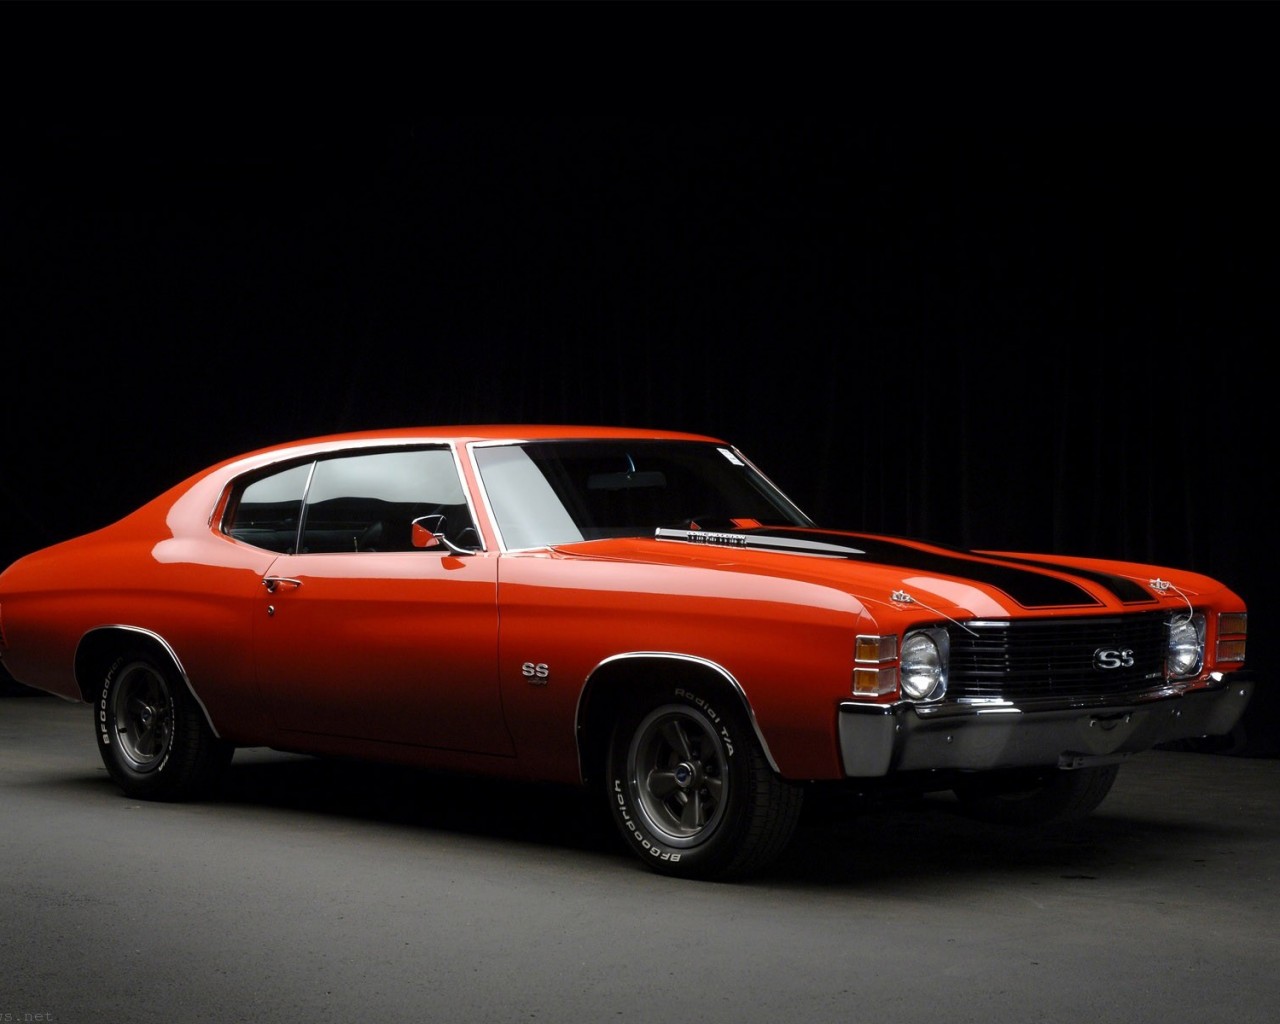 Chevy Muscle Car Wallpaper 4220 Hd Wallpapers in Cars   Imagescicom 1280x1024